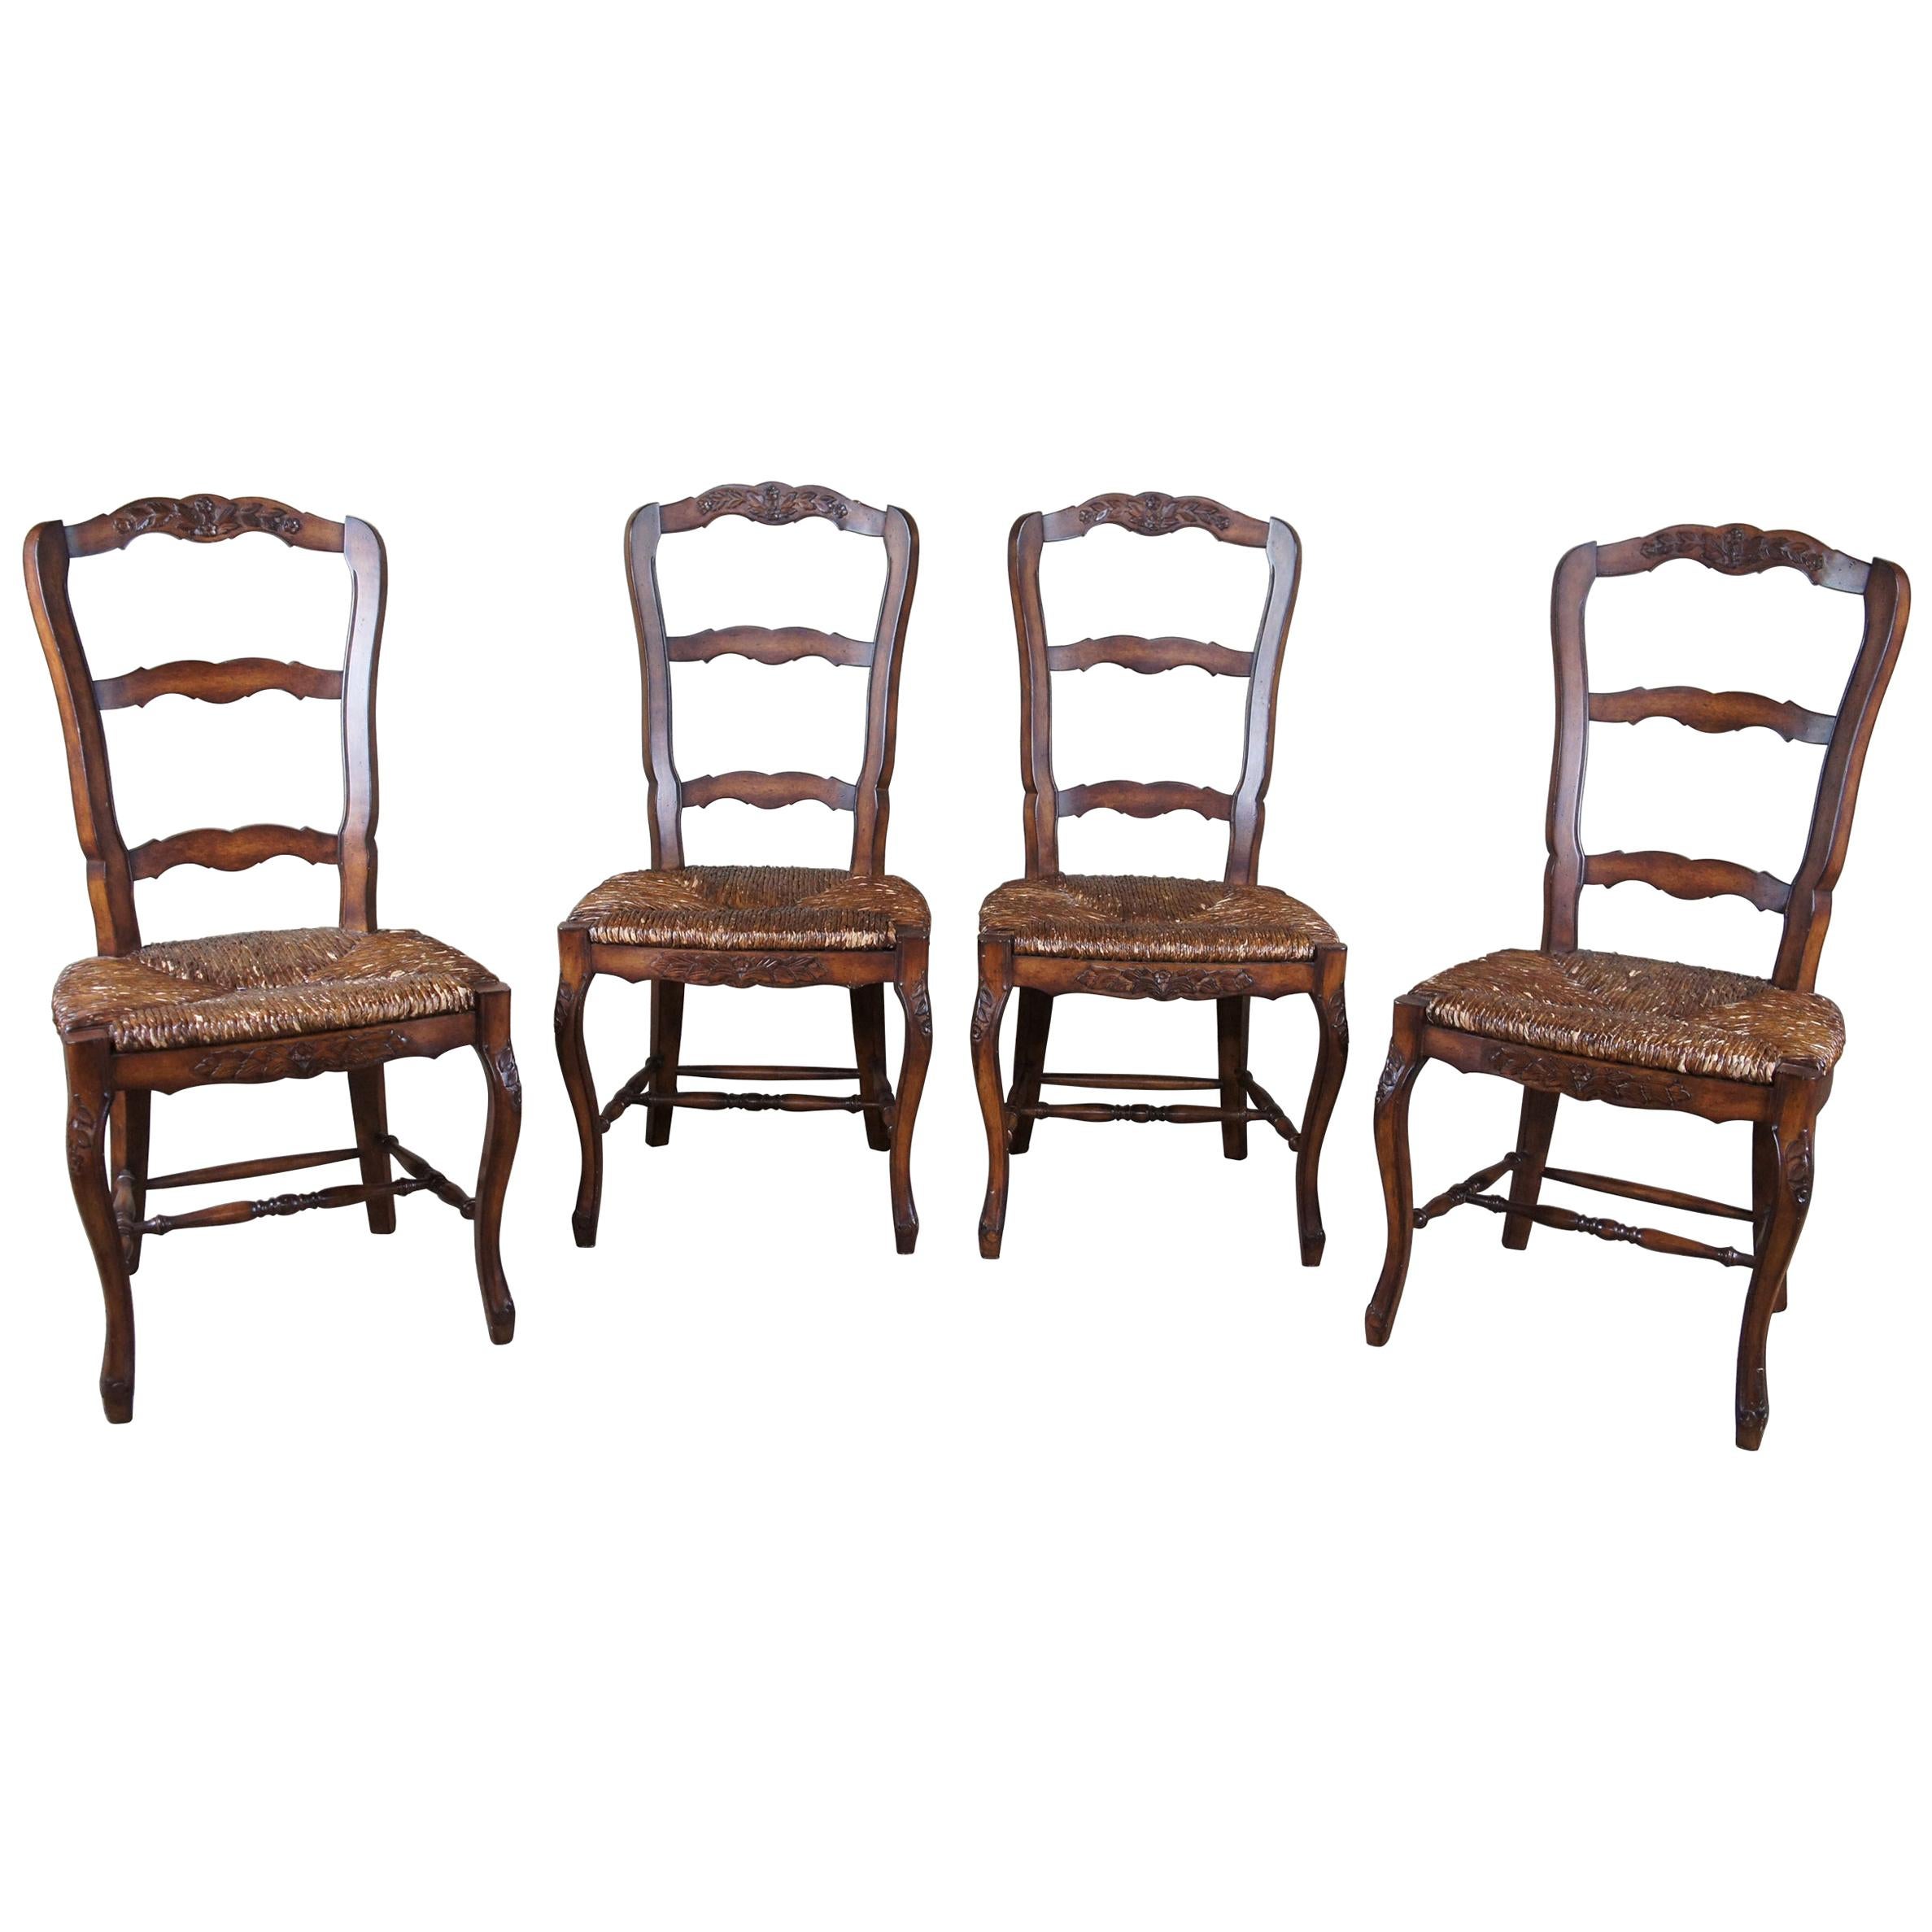 4 Lewis Mittman Country French Ladderback Dining Chairs Rush Seat Farmhouse